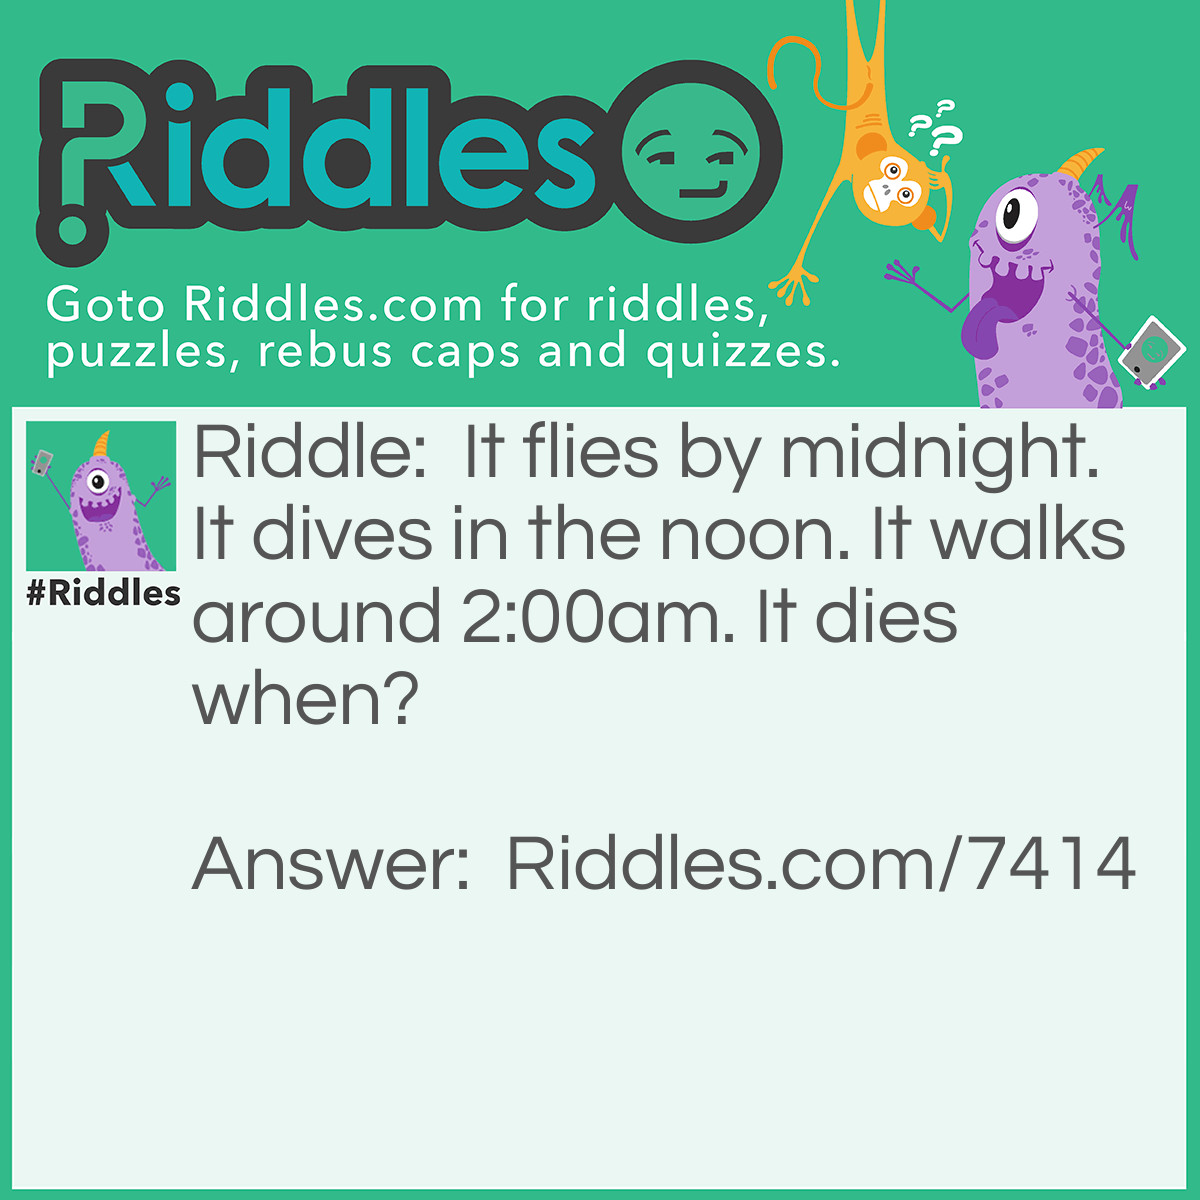 Riddle: It flies by midnight. It dives in the noon. It walks around 2:00am. It dies when? Answer: Sunrise (its the moon!)